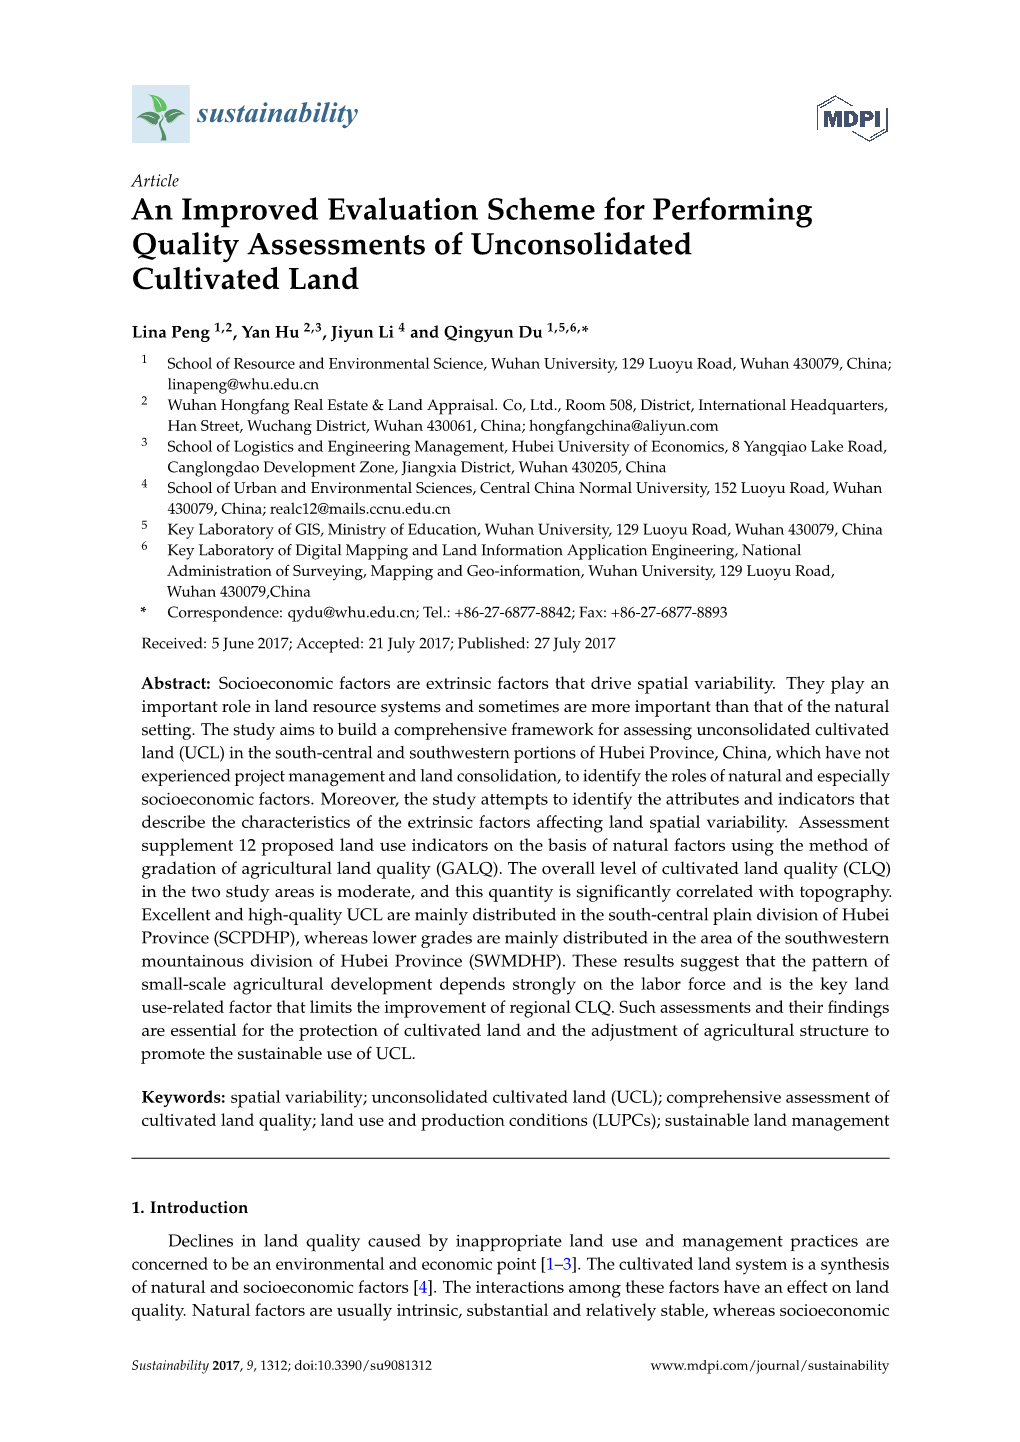 An Improved Evaluation Scheme for Performing Quality Assessments of Unconsolidated Cultivated Land